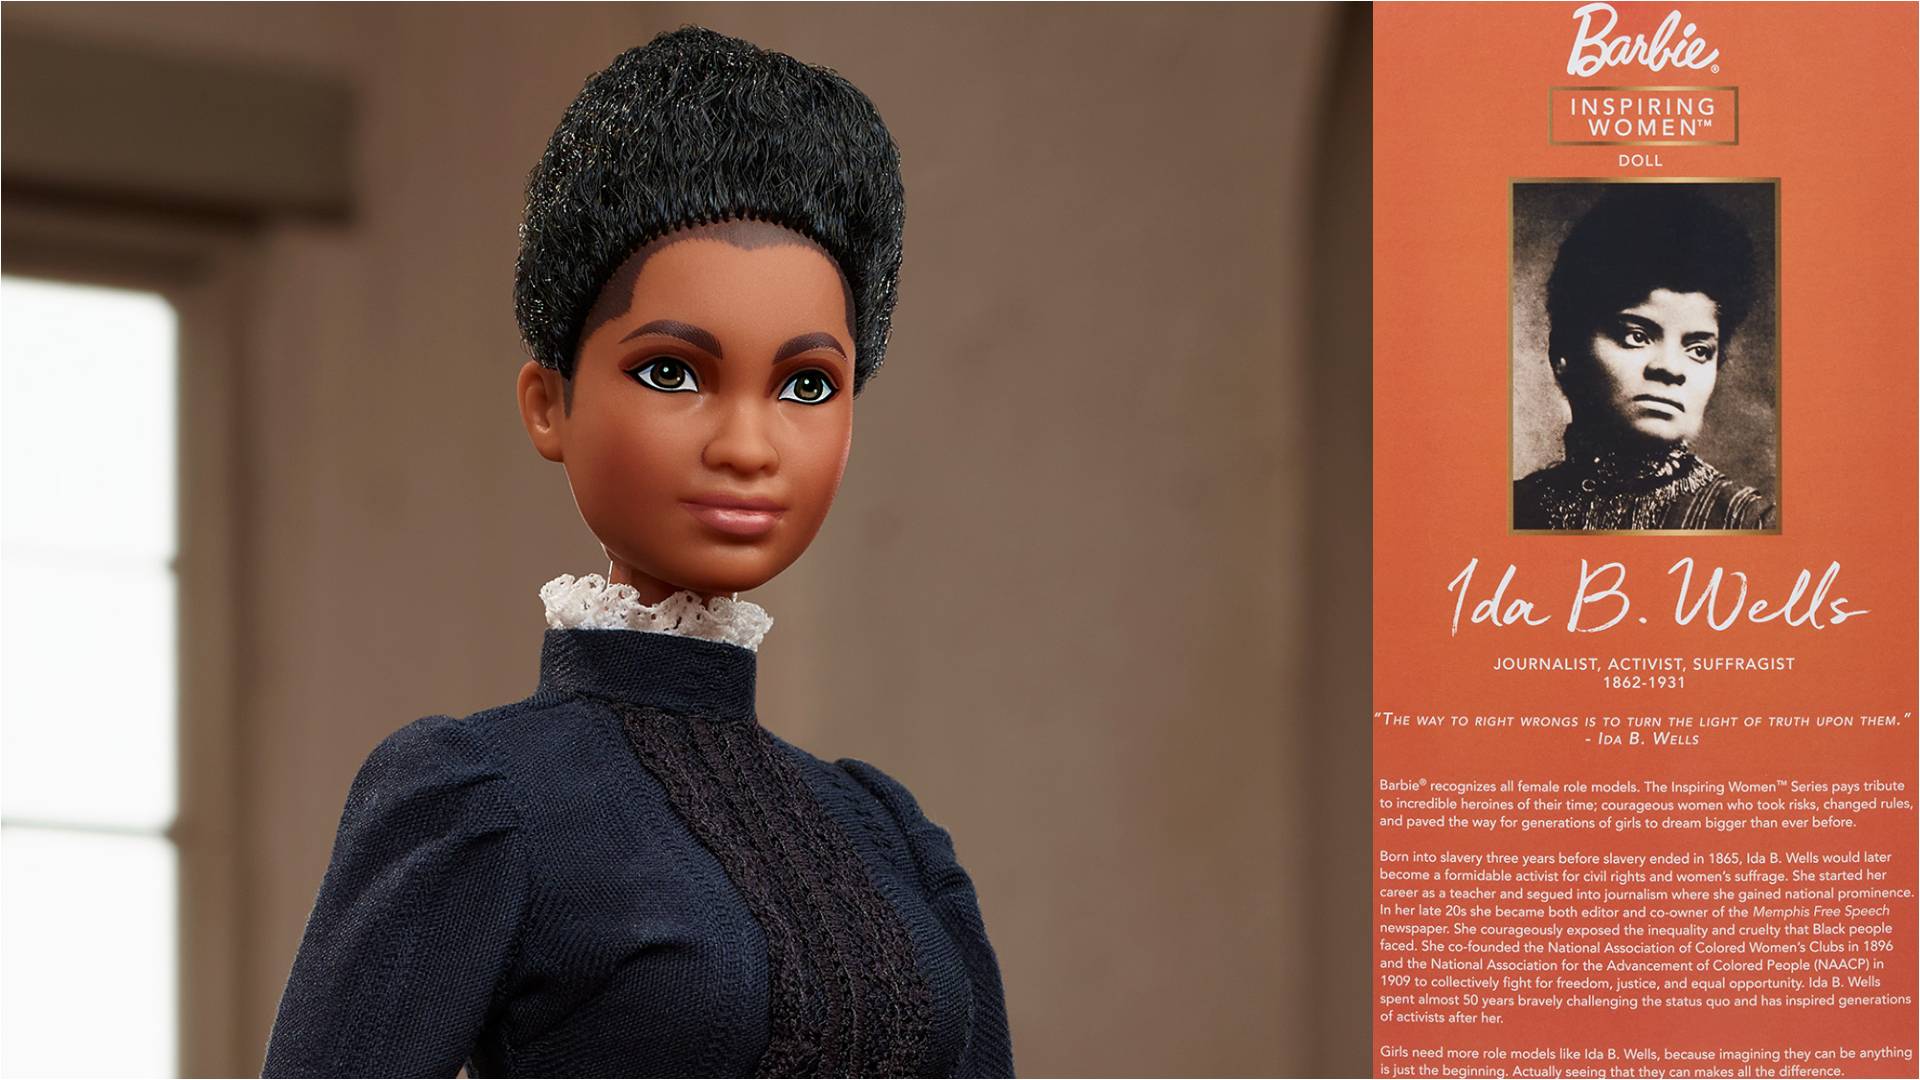 Barbie Honors Ida B. Wells With A Doll—This Is What The Activist’s Great-Granddaughter Hopes It Inspires!